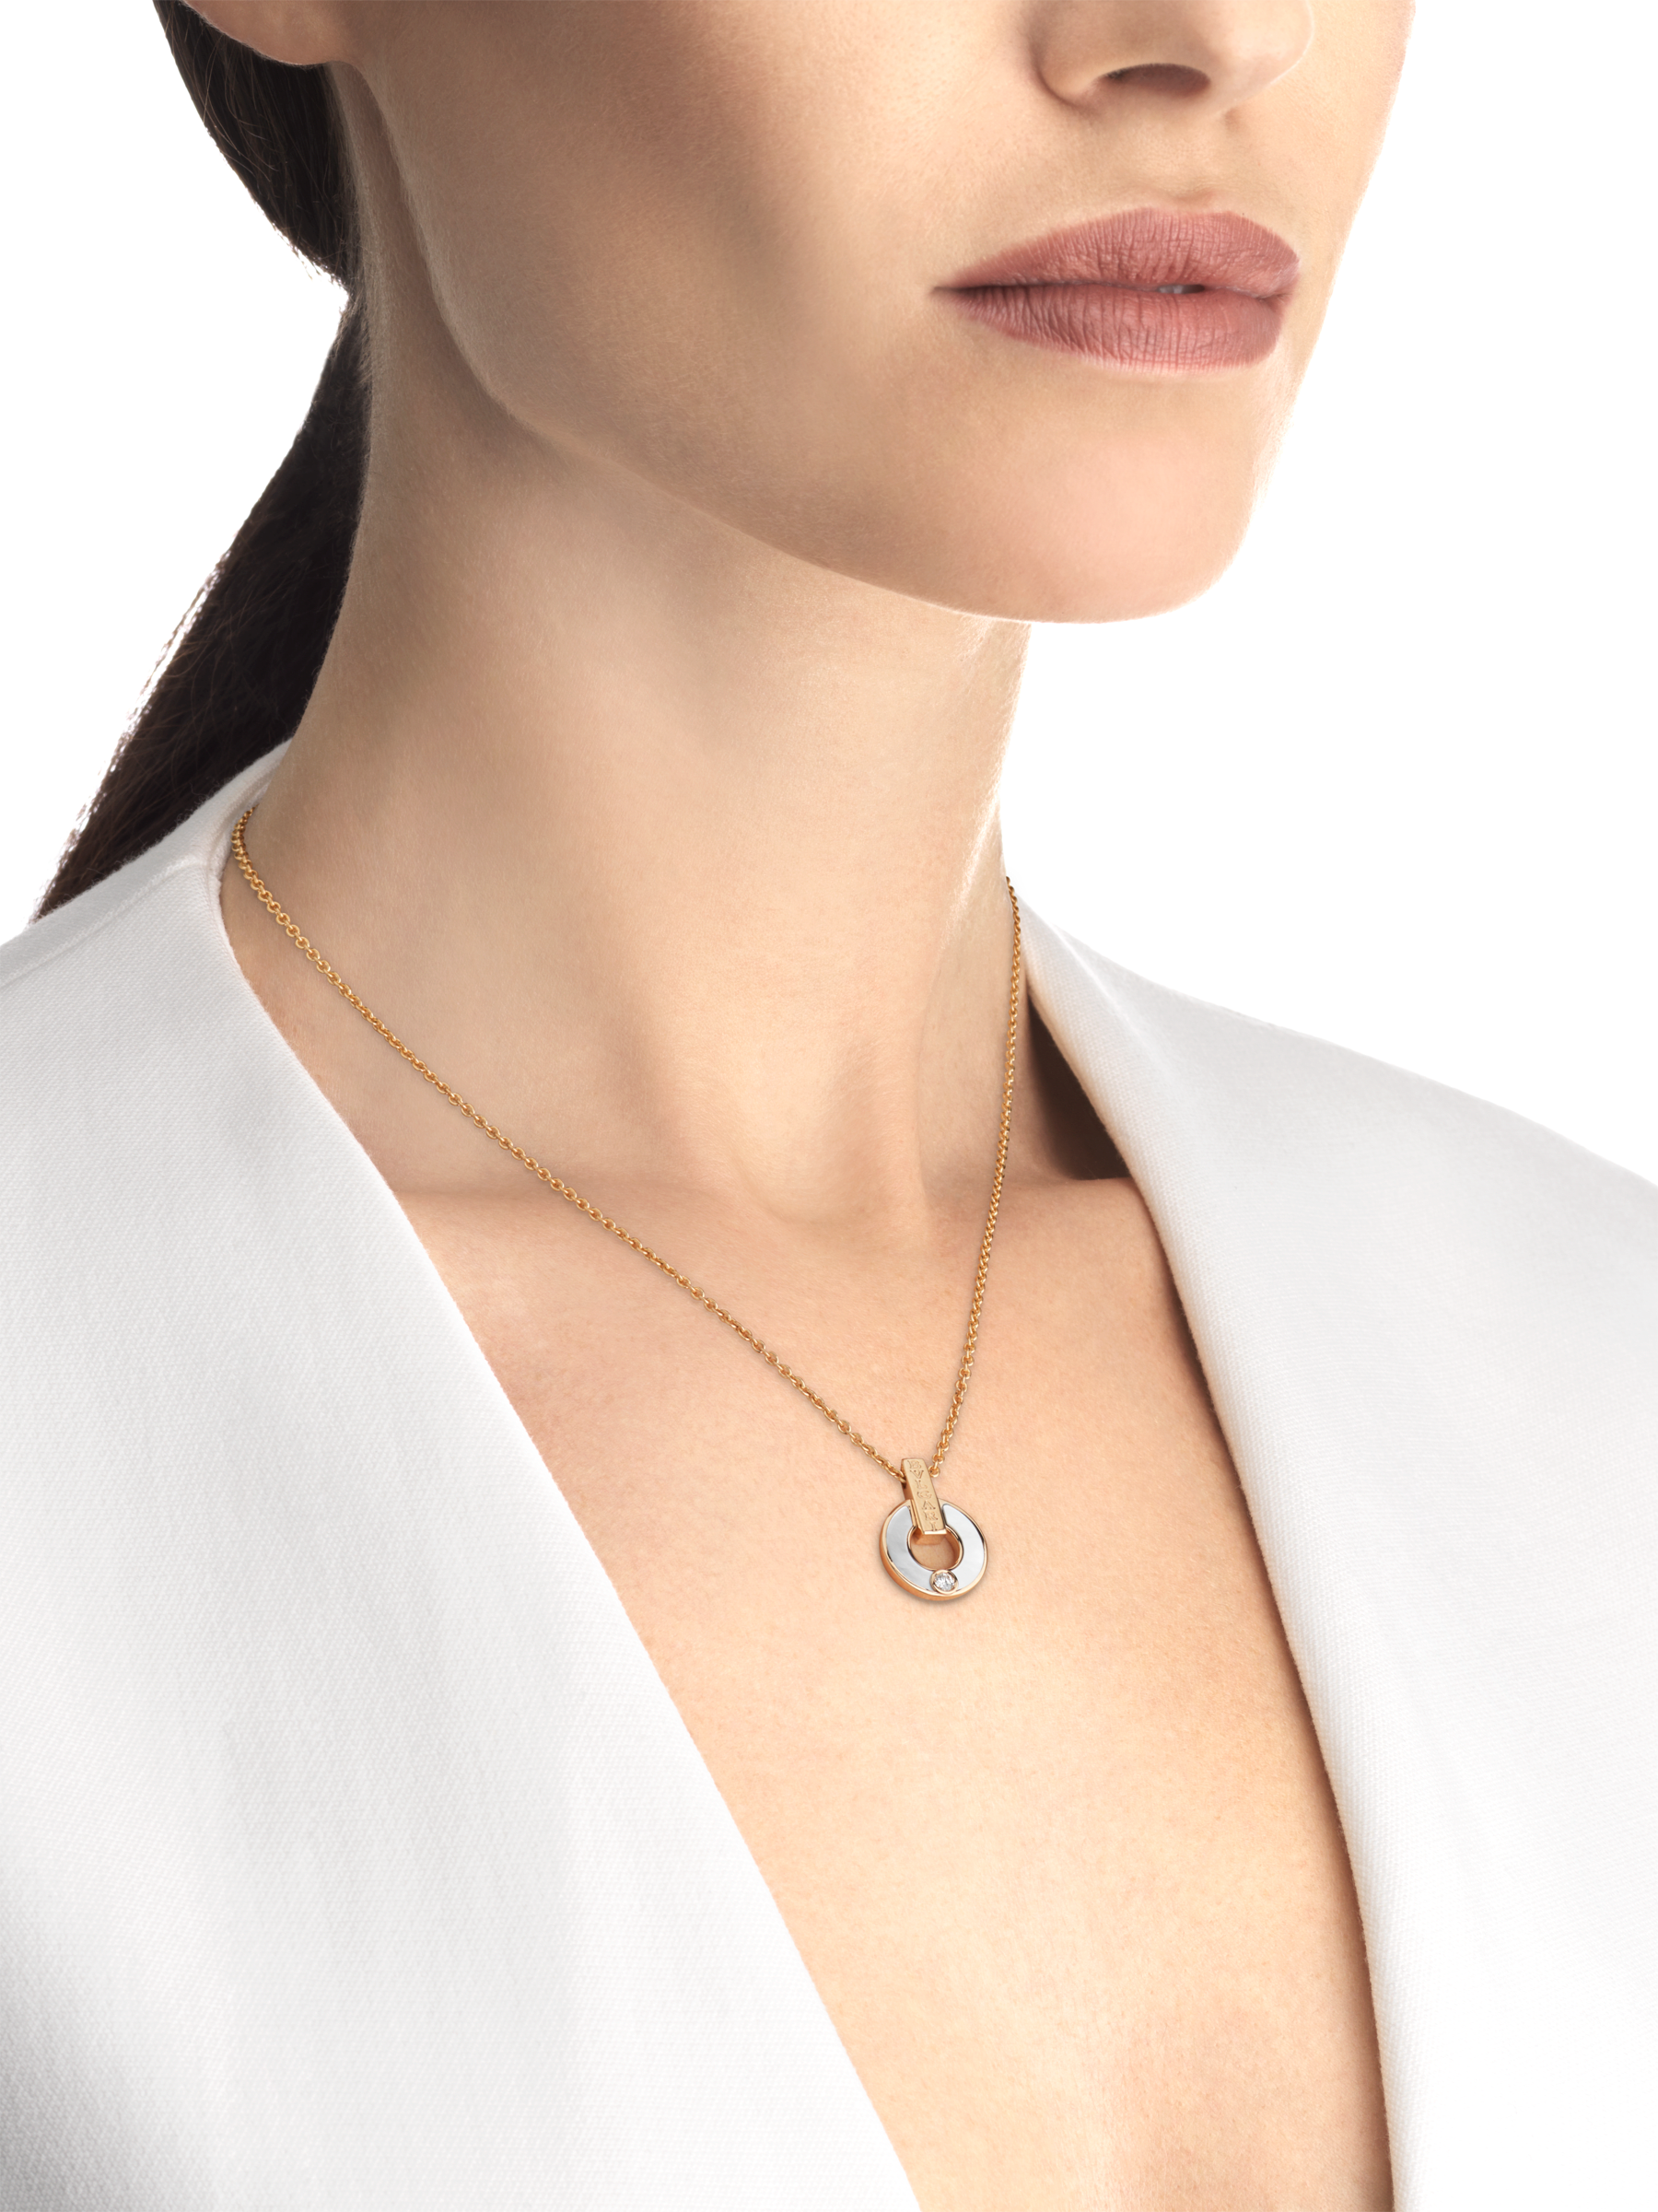 bvlgari necklace mother of pearl